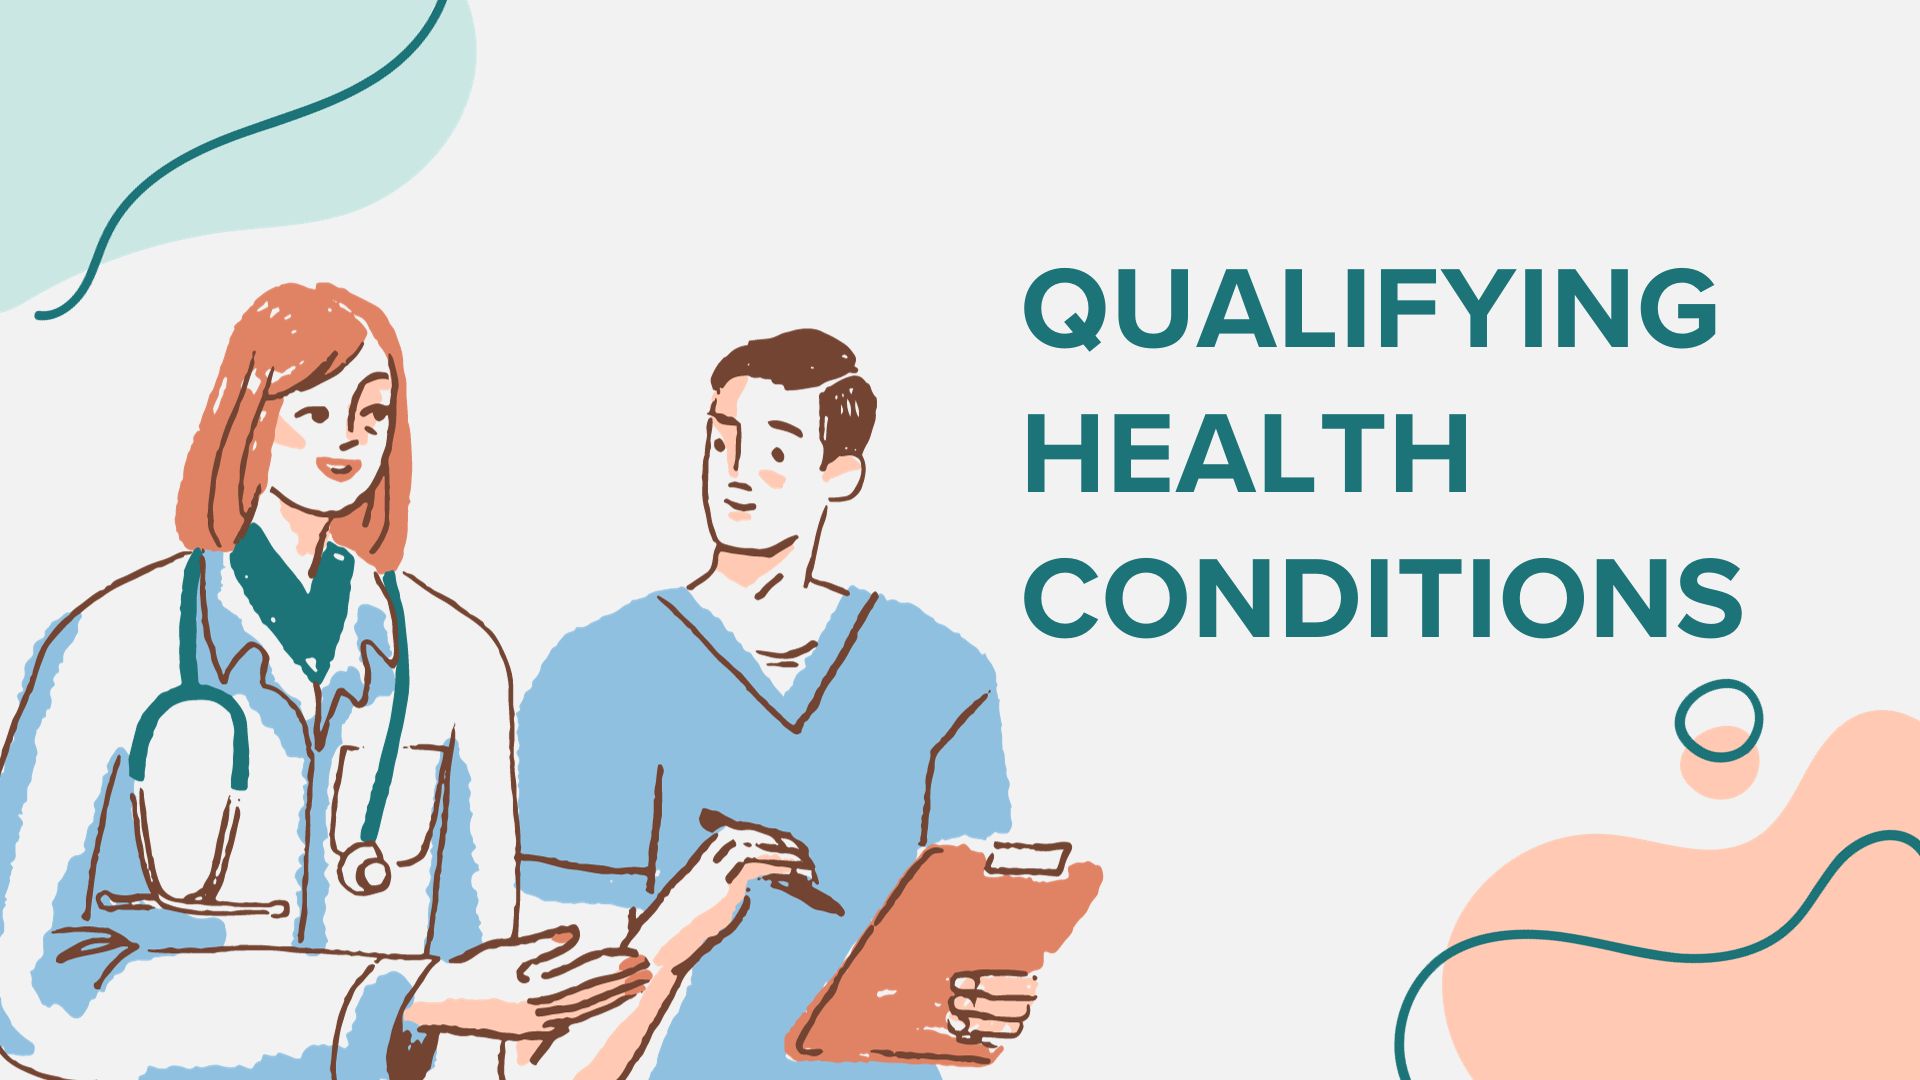 Qualifying Health Conditions